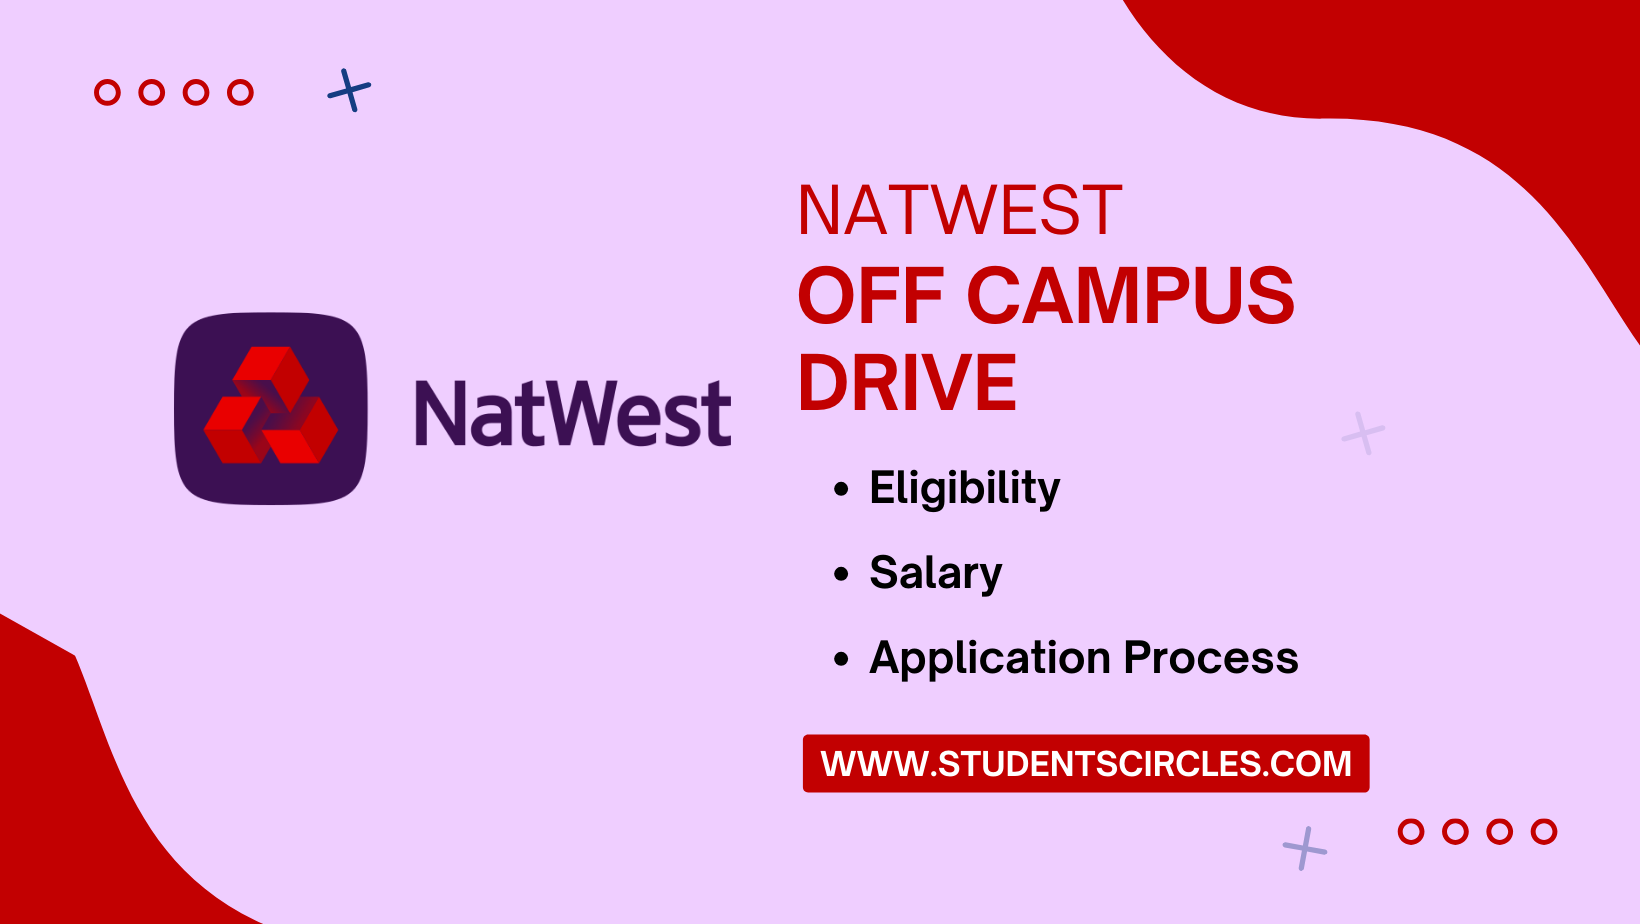 NatWest Off Campus Drive